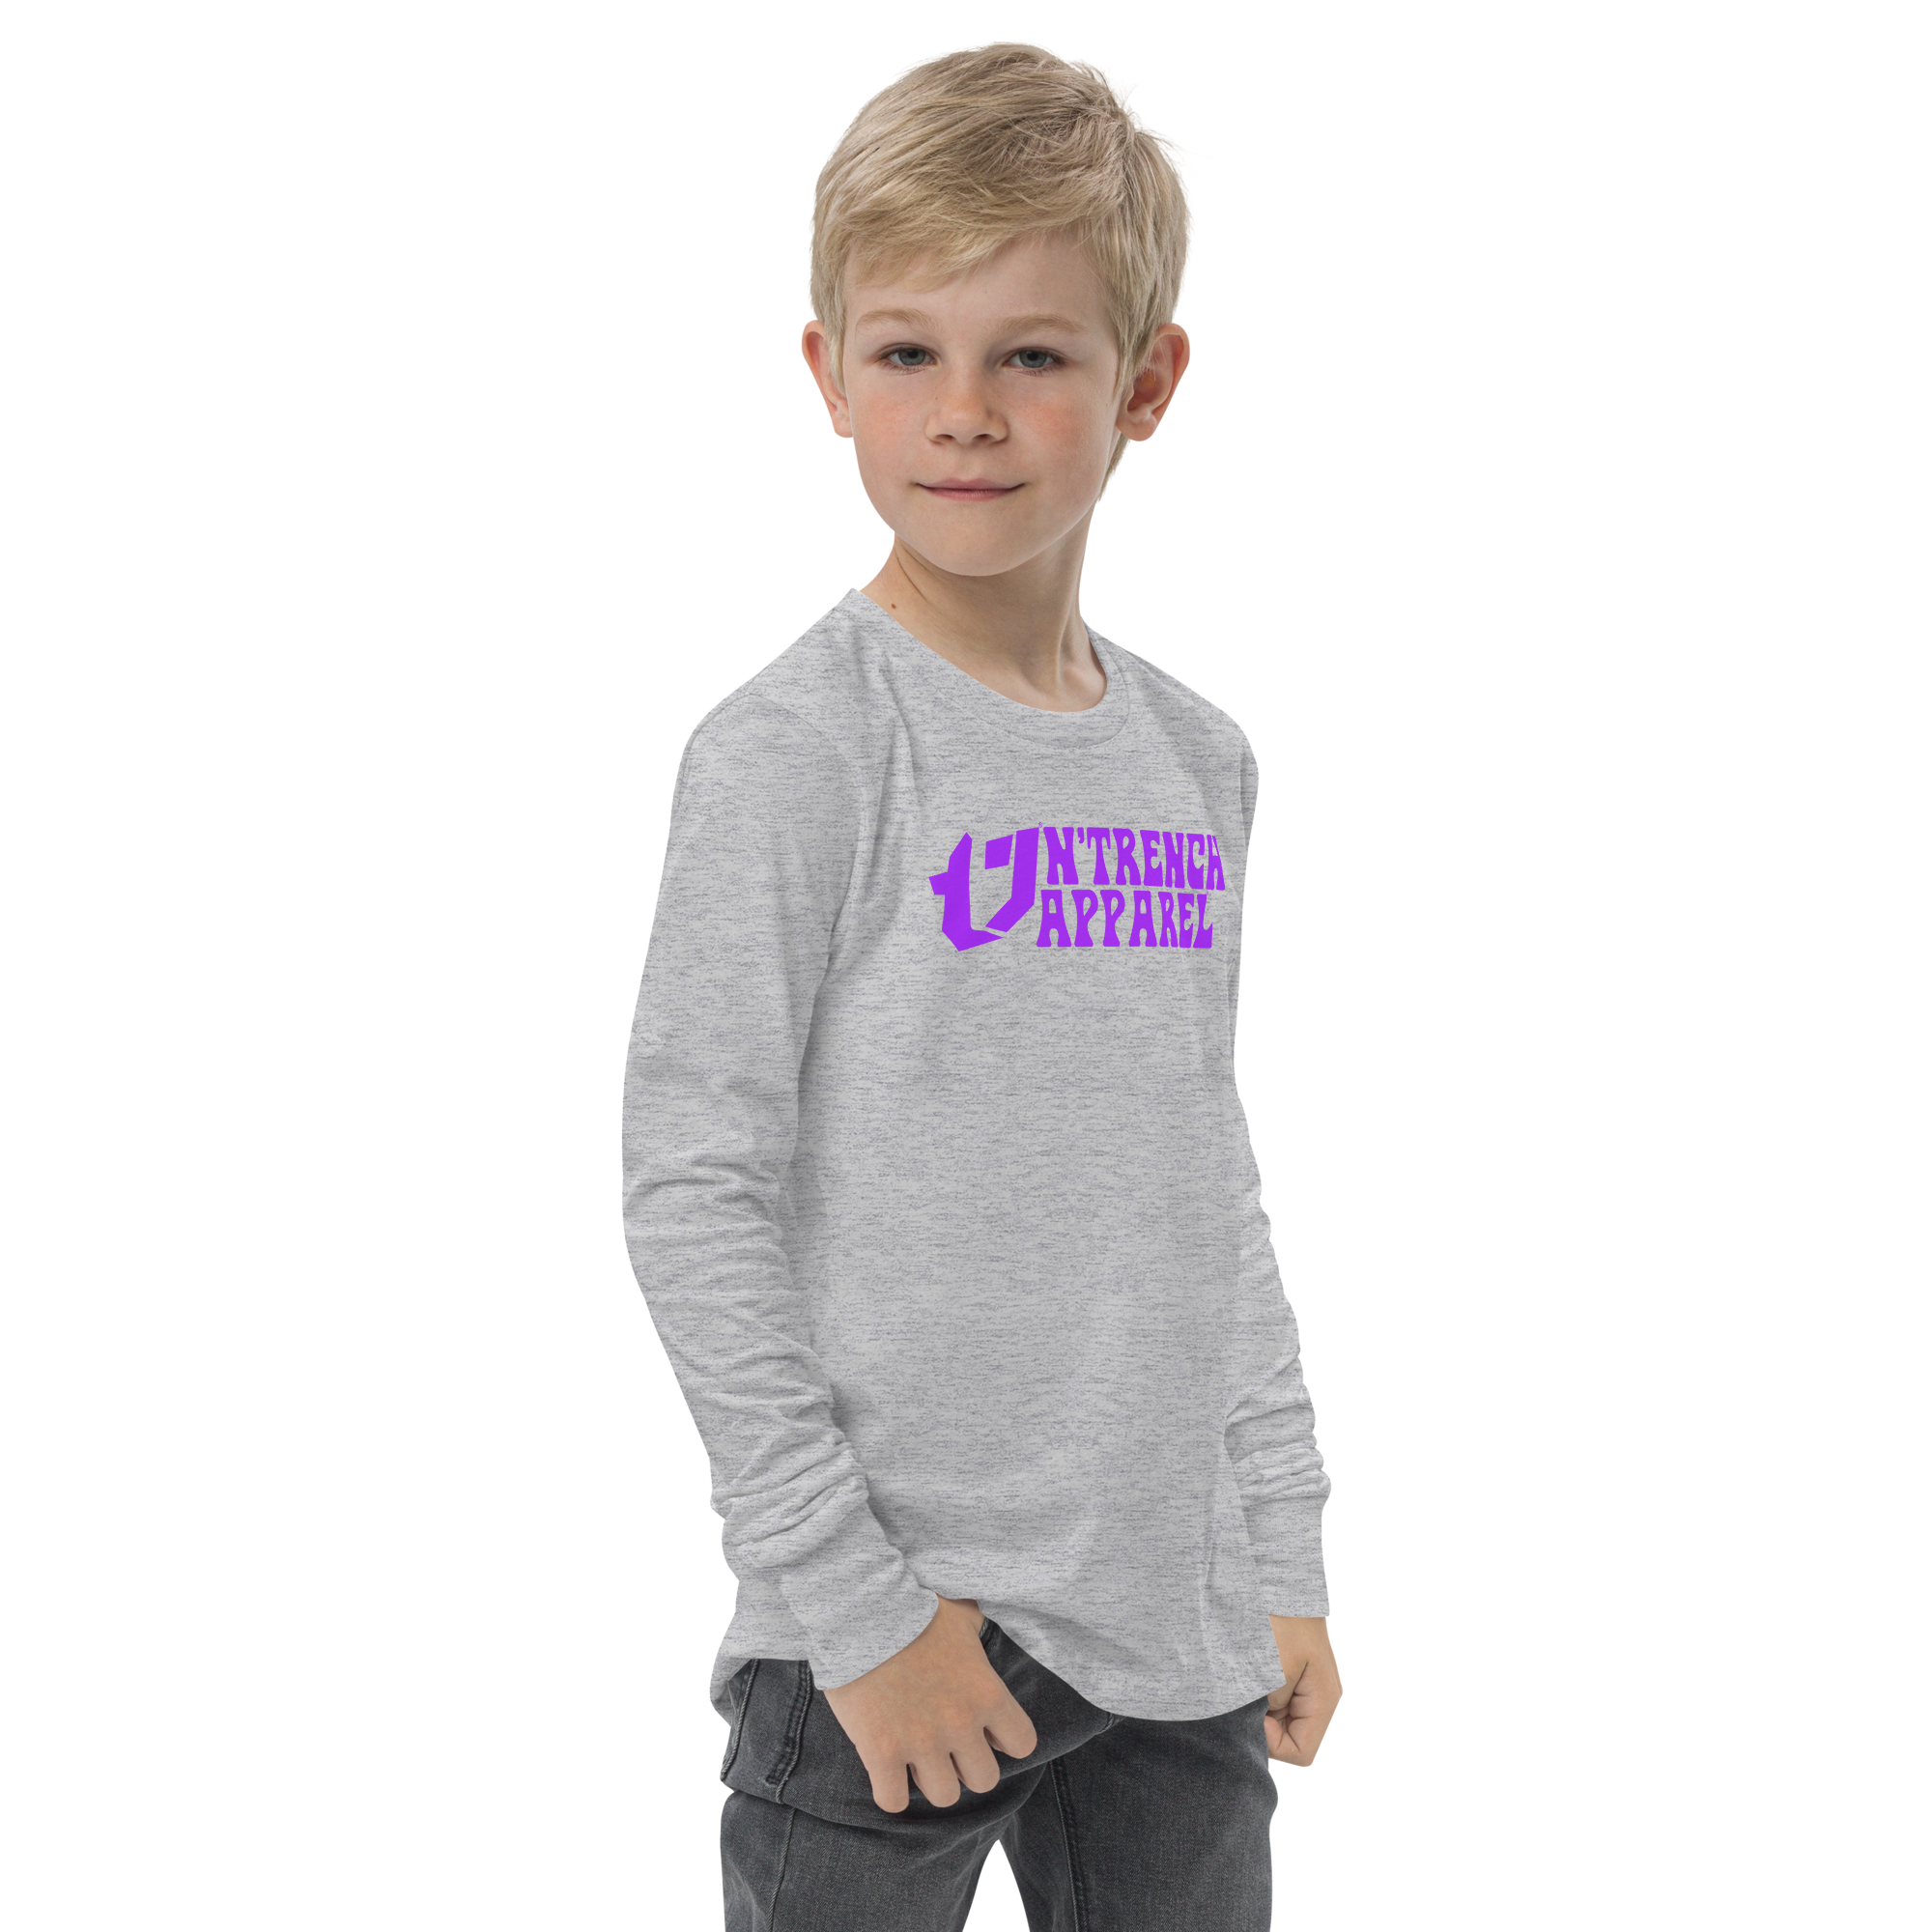 N'Trench Apparel Purple Lettering Youth/Girls long sleeve tee